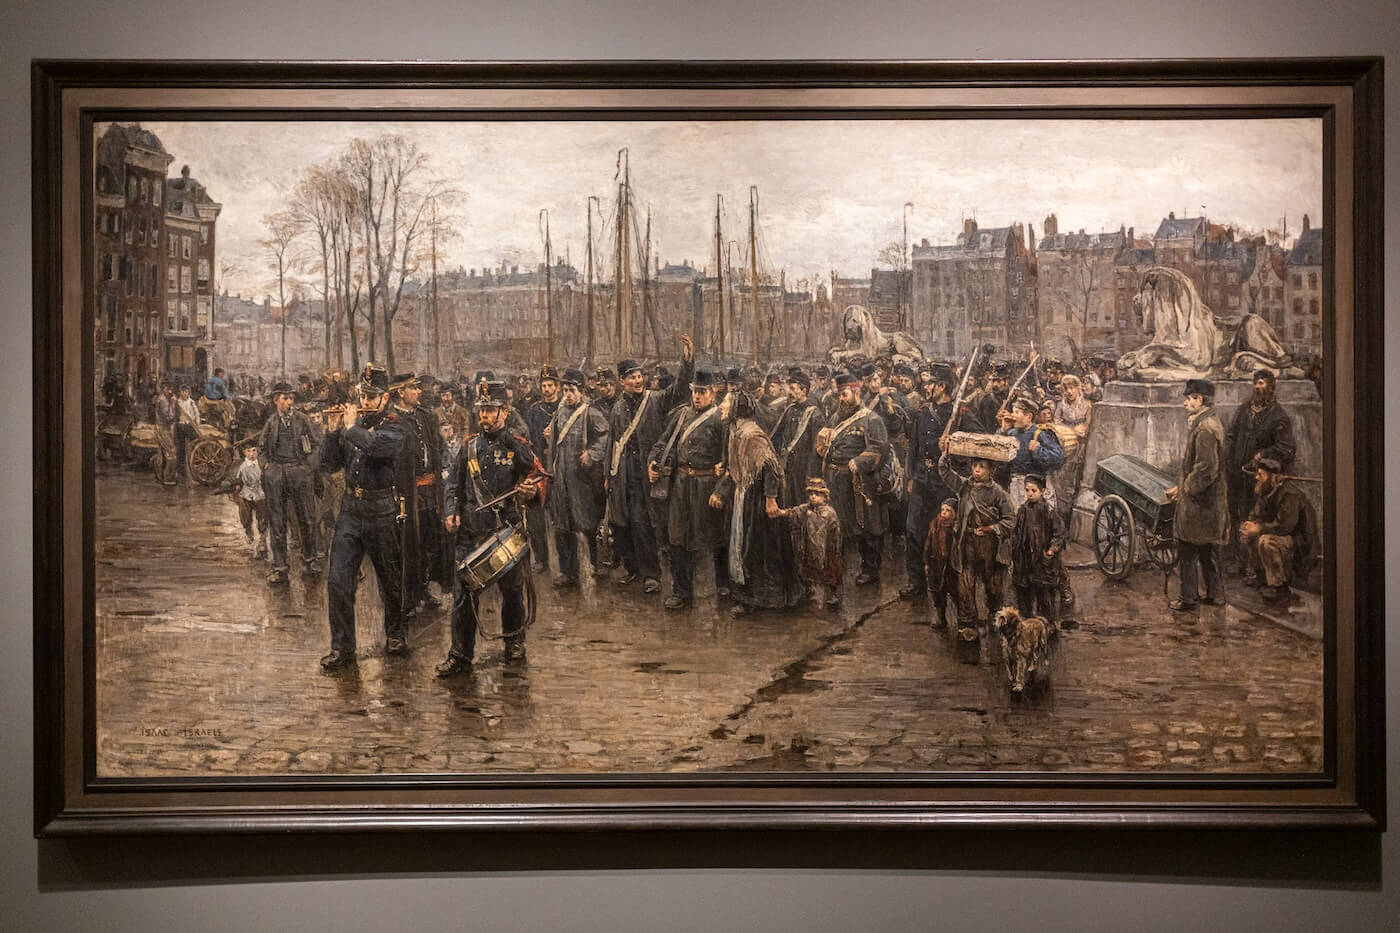 Transport of Colonial Soldiers, 1887, Isaac Israel - Rijksmuseum, Amsterdam - Photo by Joel Levy